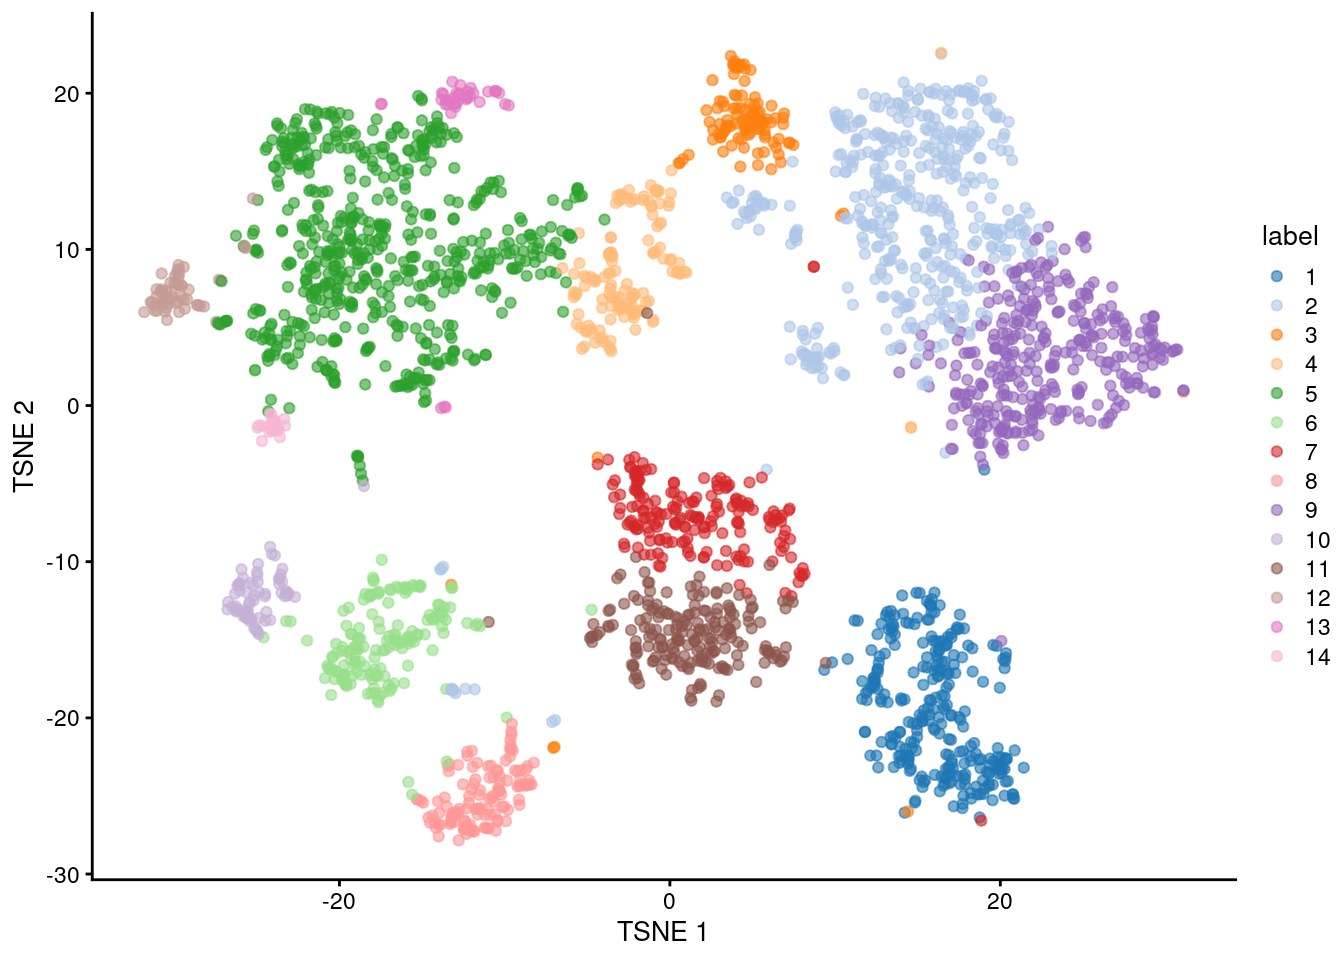 Obligatory $t$-SNE plot of the Zeisel brain dataset, where each point represents a cell and is colored according to the assigned cluster.